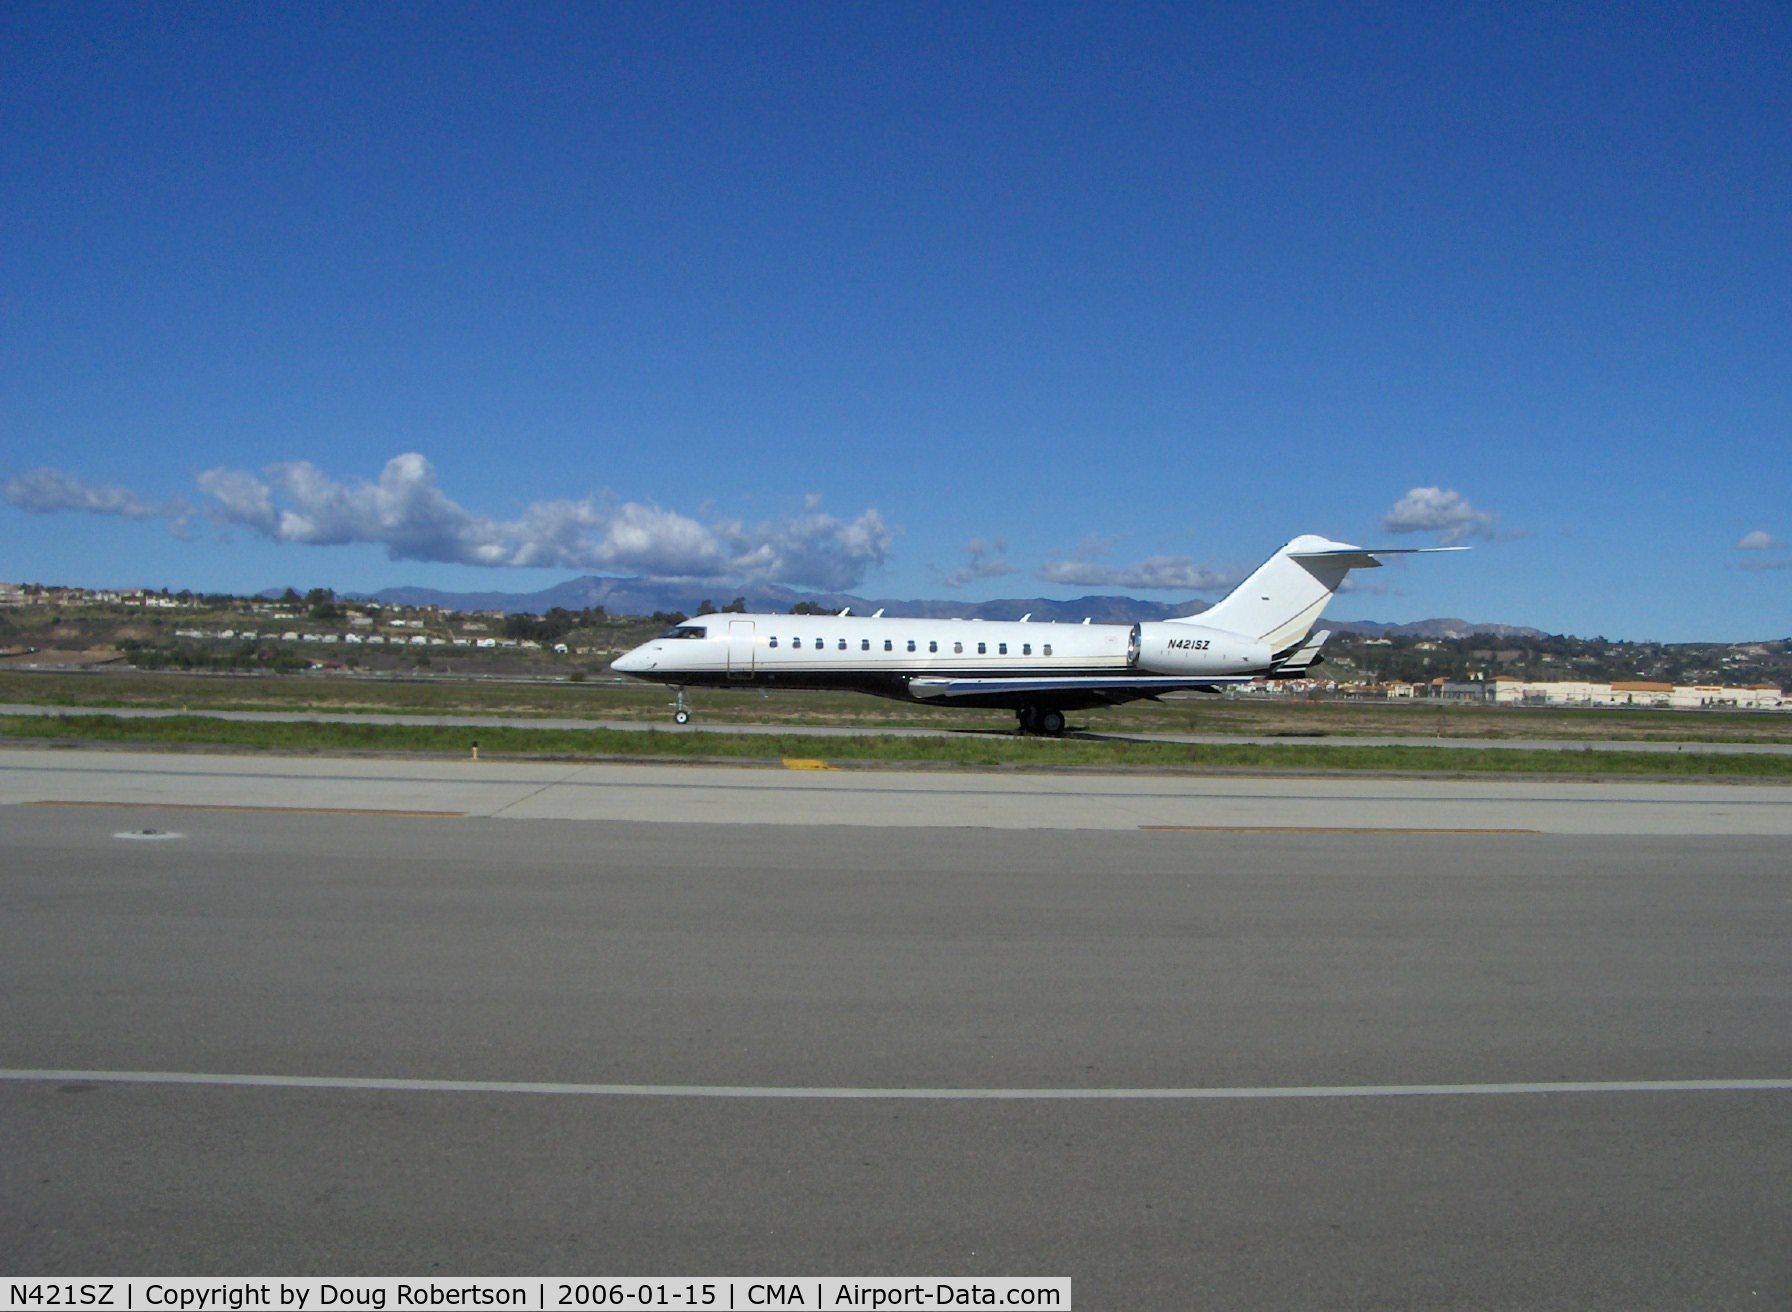 N421SZ, 2007 Bombardier BD-700-1A10 Global Express C/N 9239, 2007 Bombardier BD-700-1A10 GLOBAL EXPRESS, two Rolls Royce DEutschland BR710A2-20 Turbofans flat rated to ISA + 20 deg.C with FADEC, Holding for takeoff, Runway 26